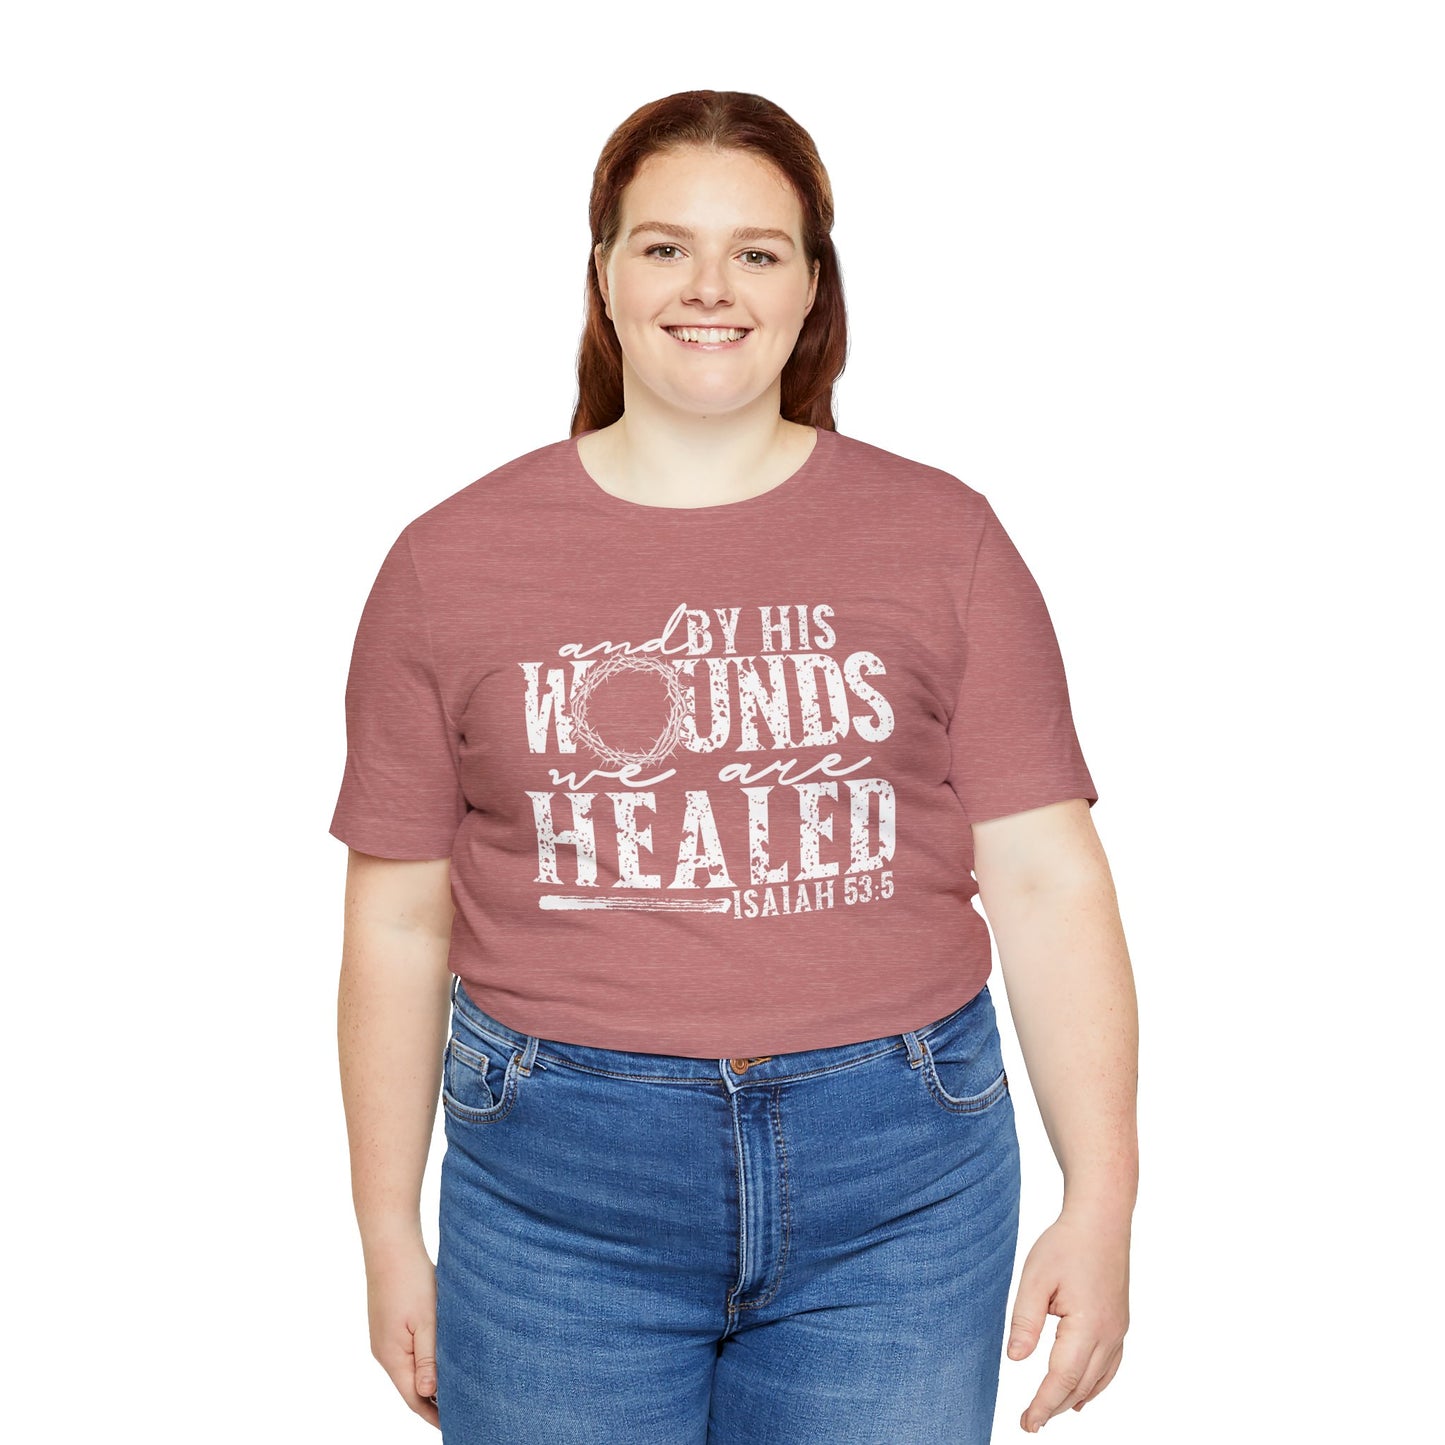 By His Wounds We Are Healed Christian Faith Easter Shirt